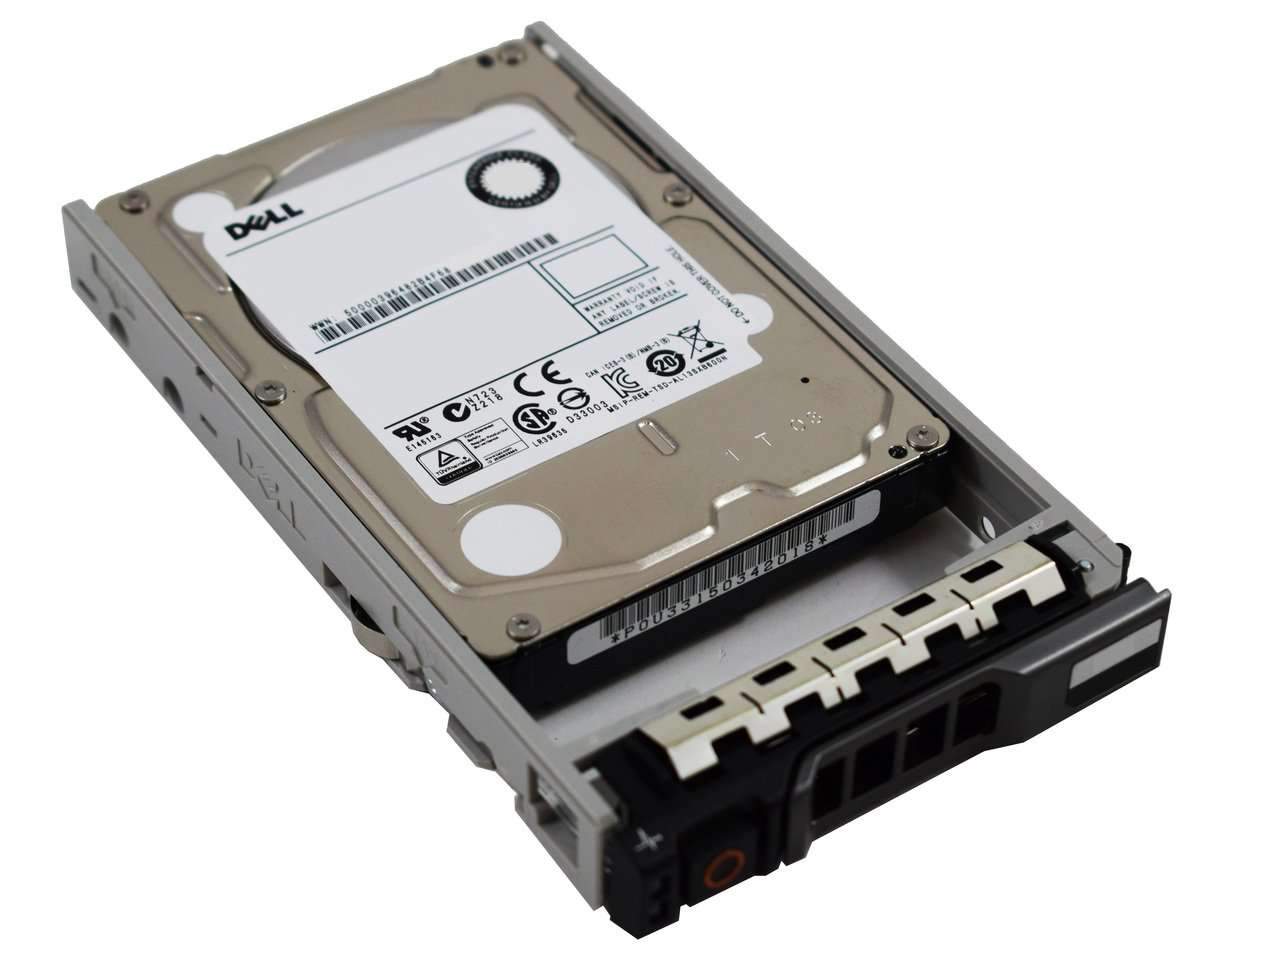 Dell G13 342-2240 300GB 15K RPM SAS 6Gb/s 512n 2.5" Manufacturer Recertified HDD